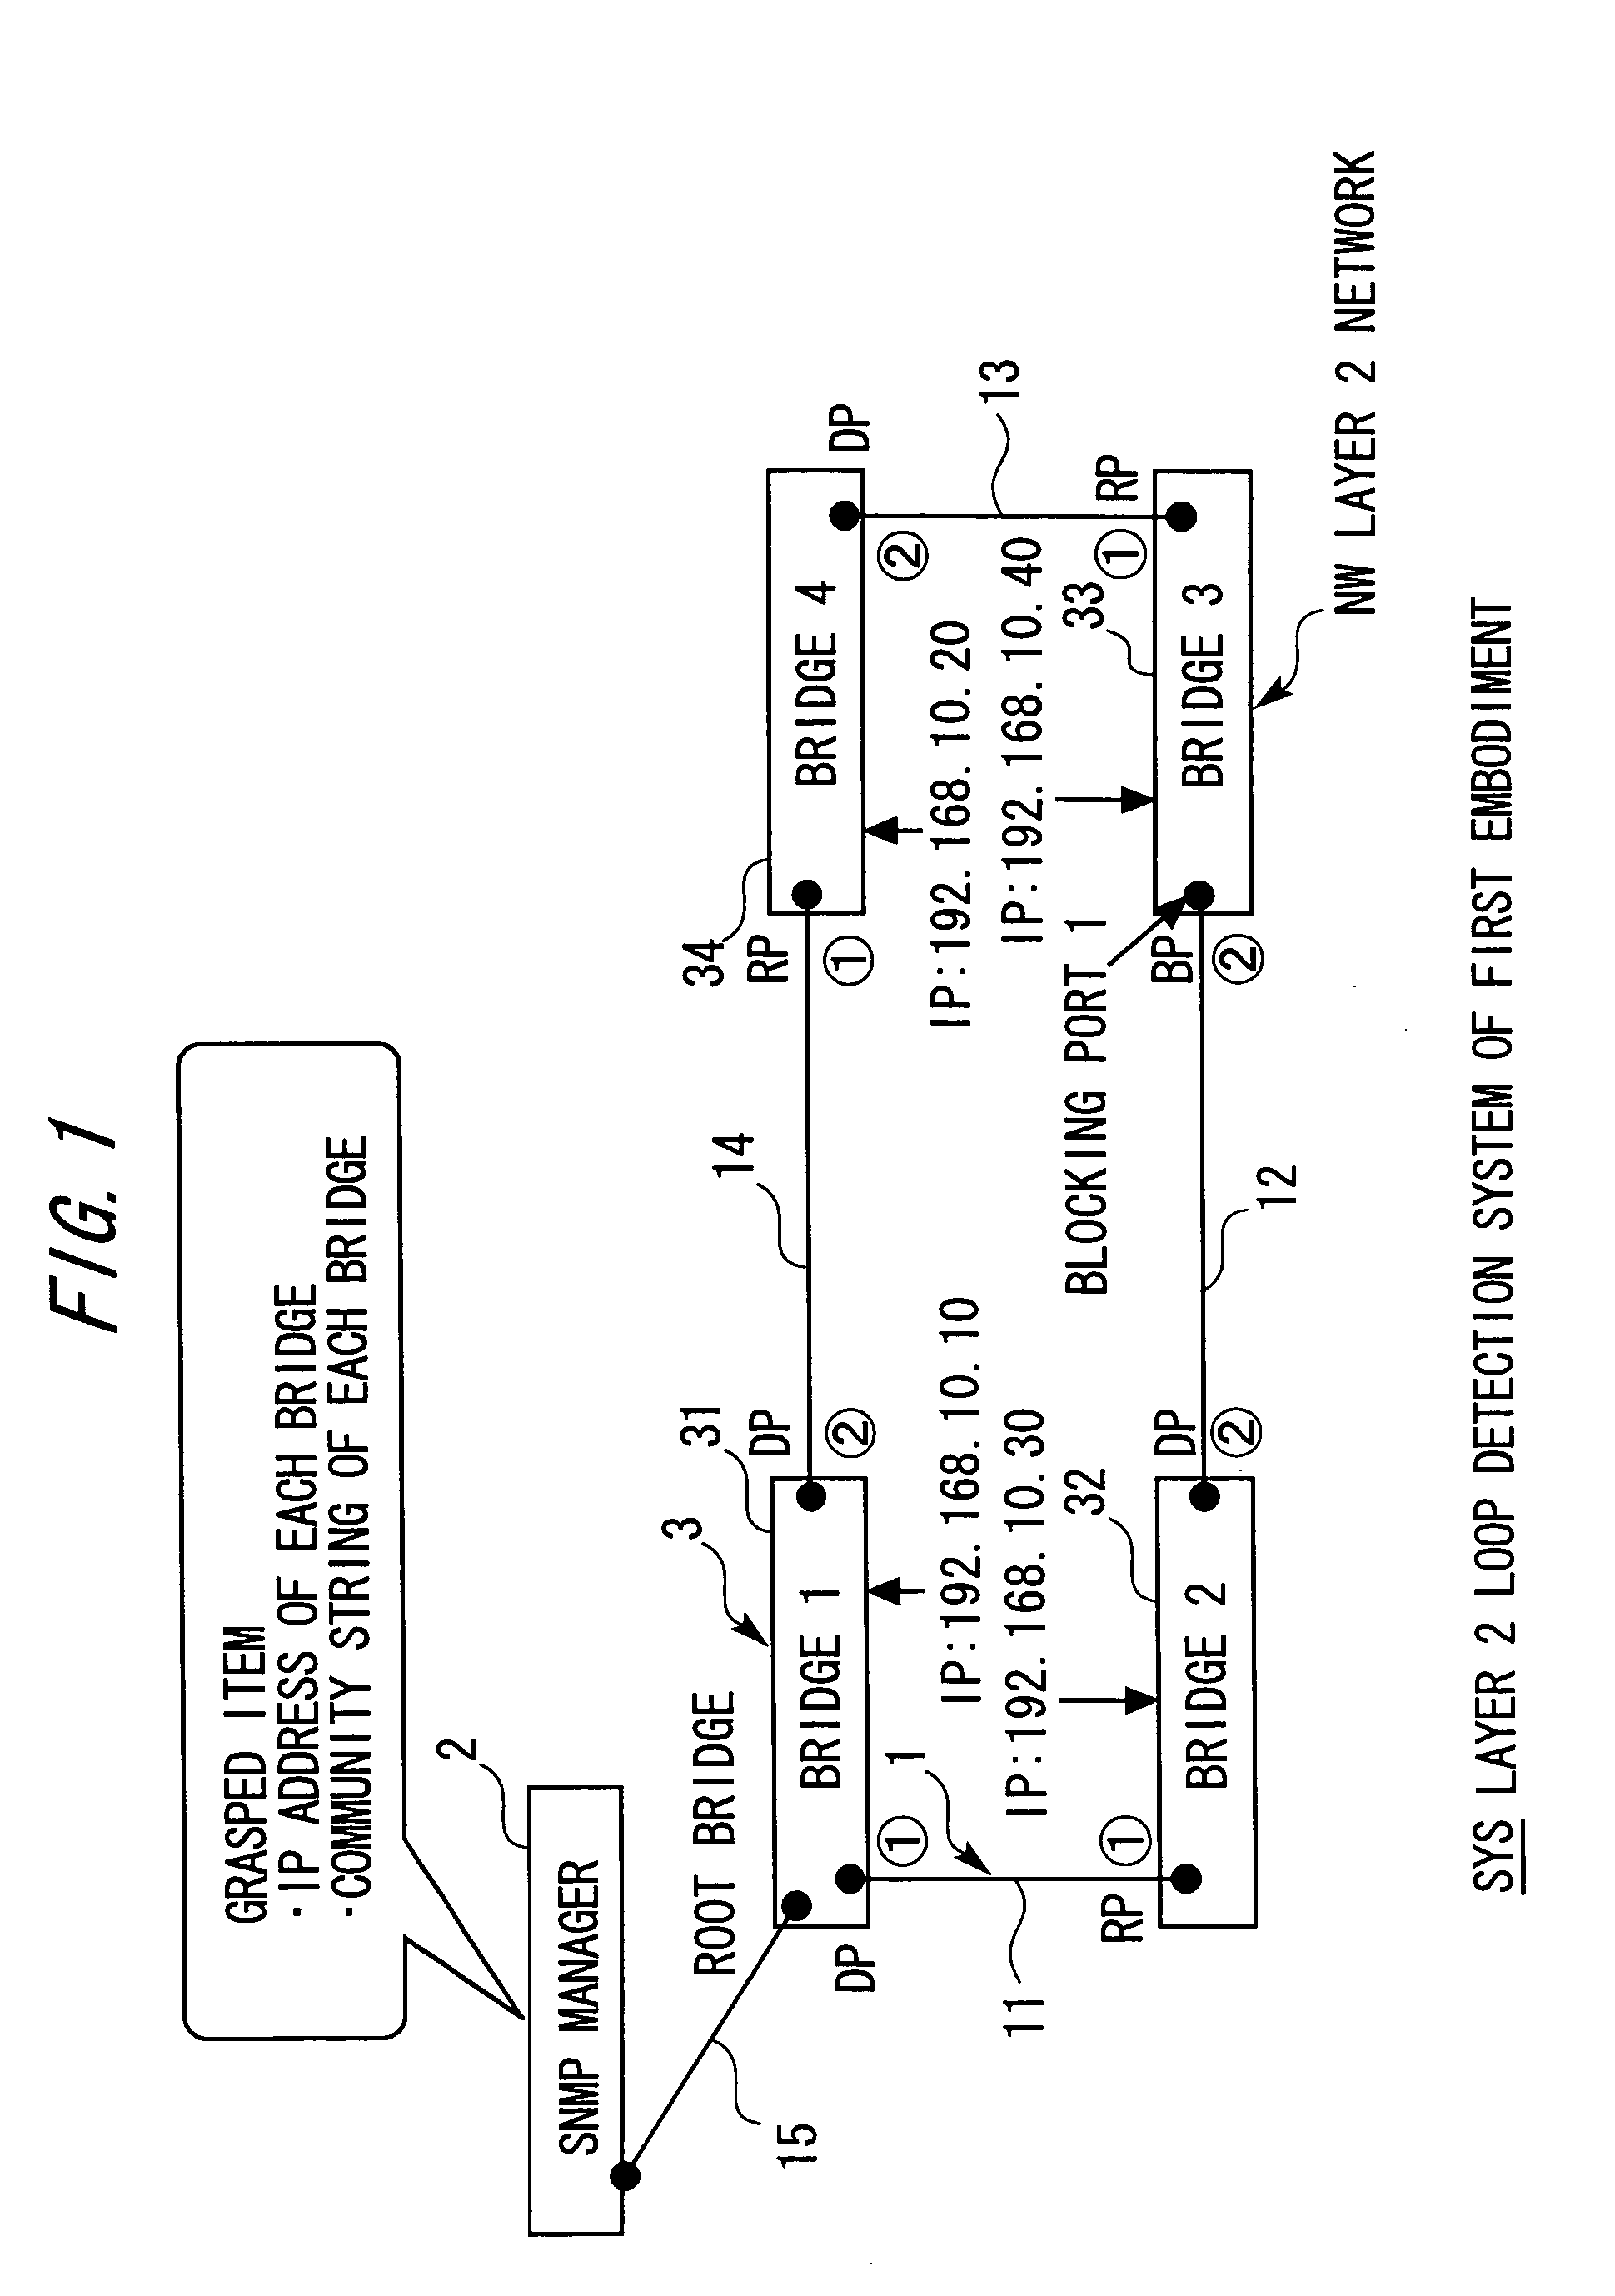 Layer 2 loop detection system